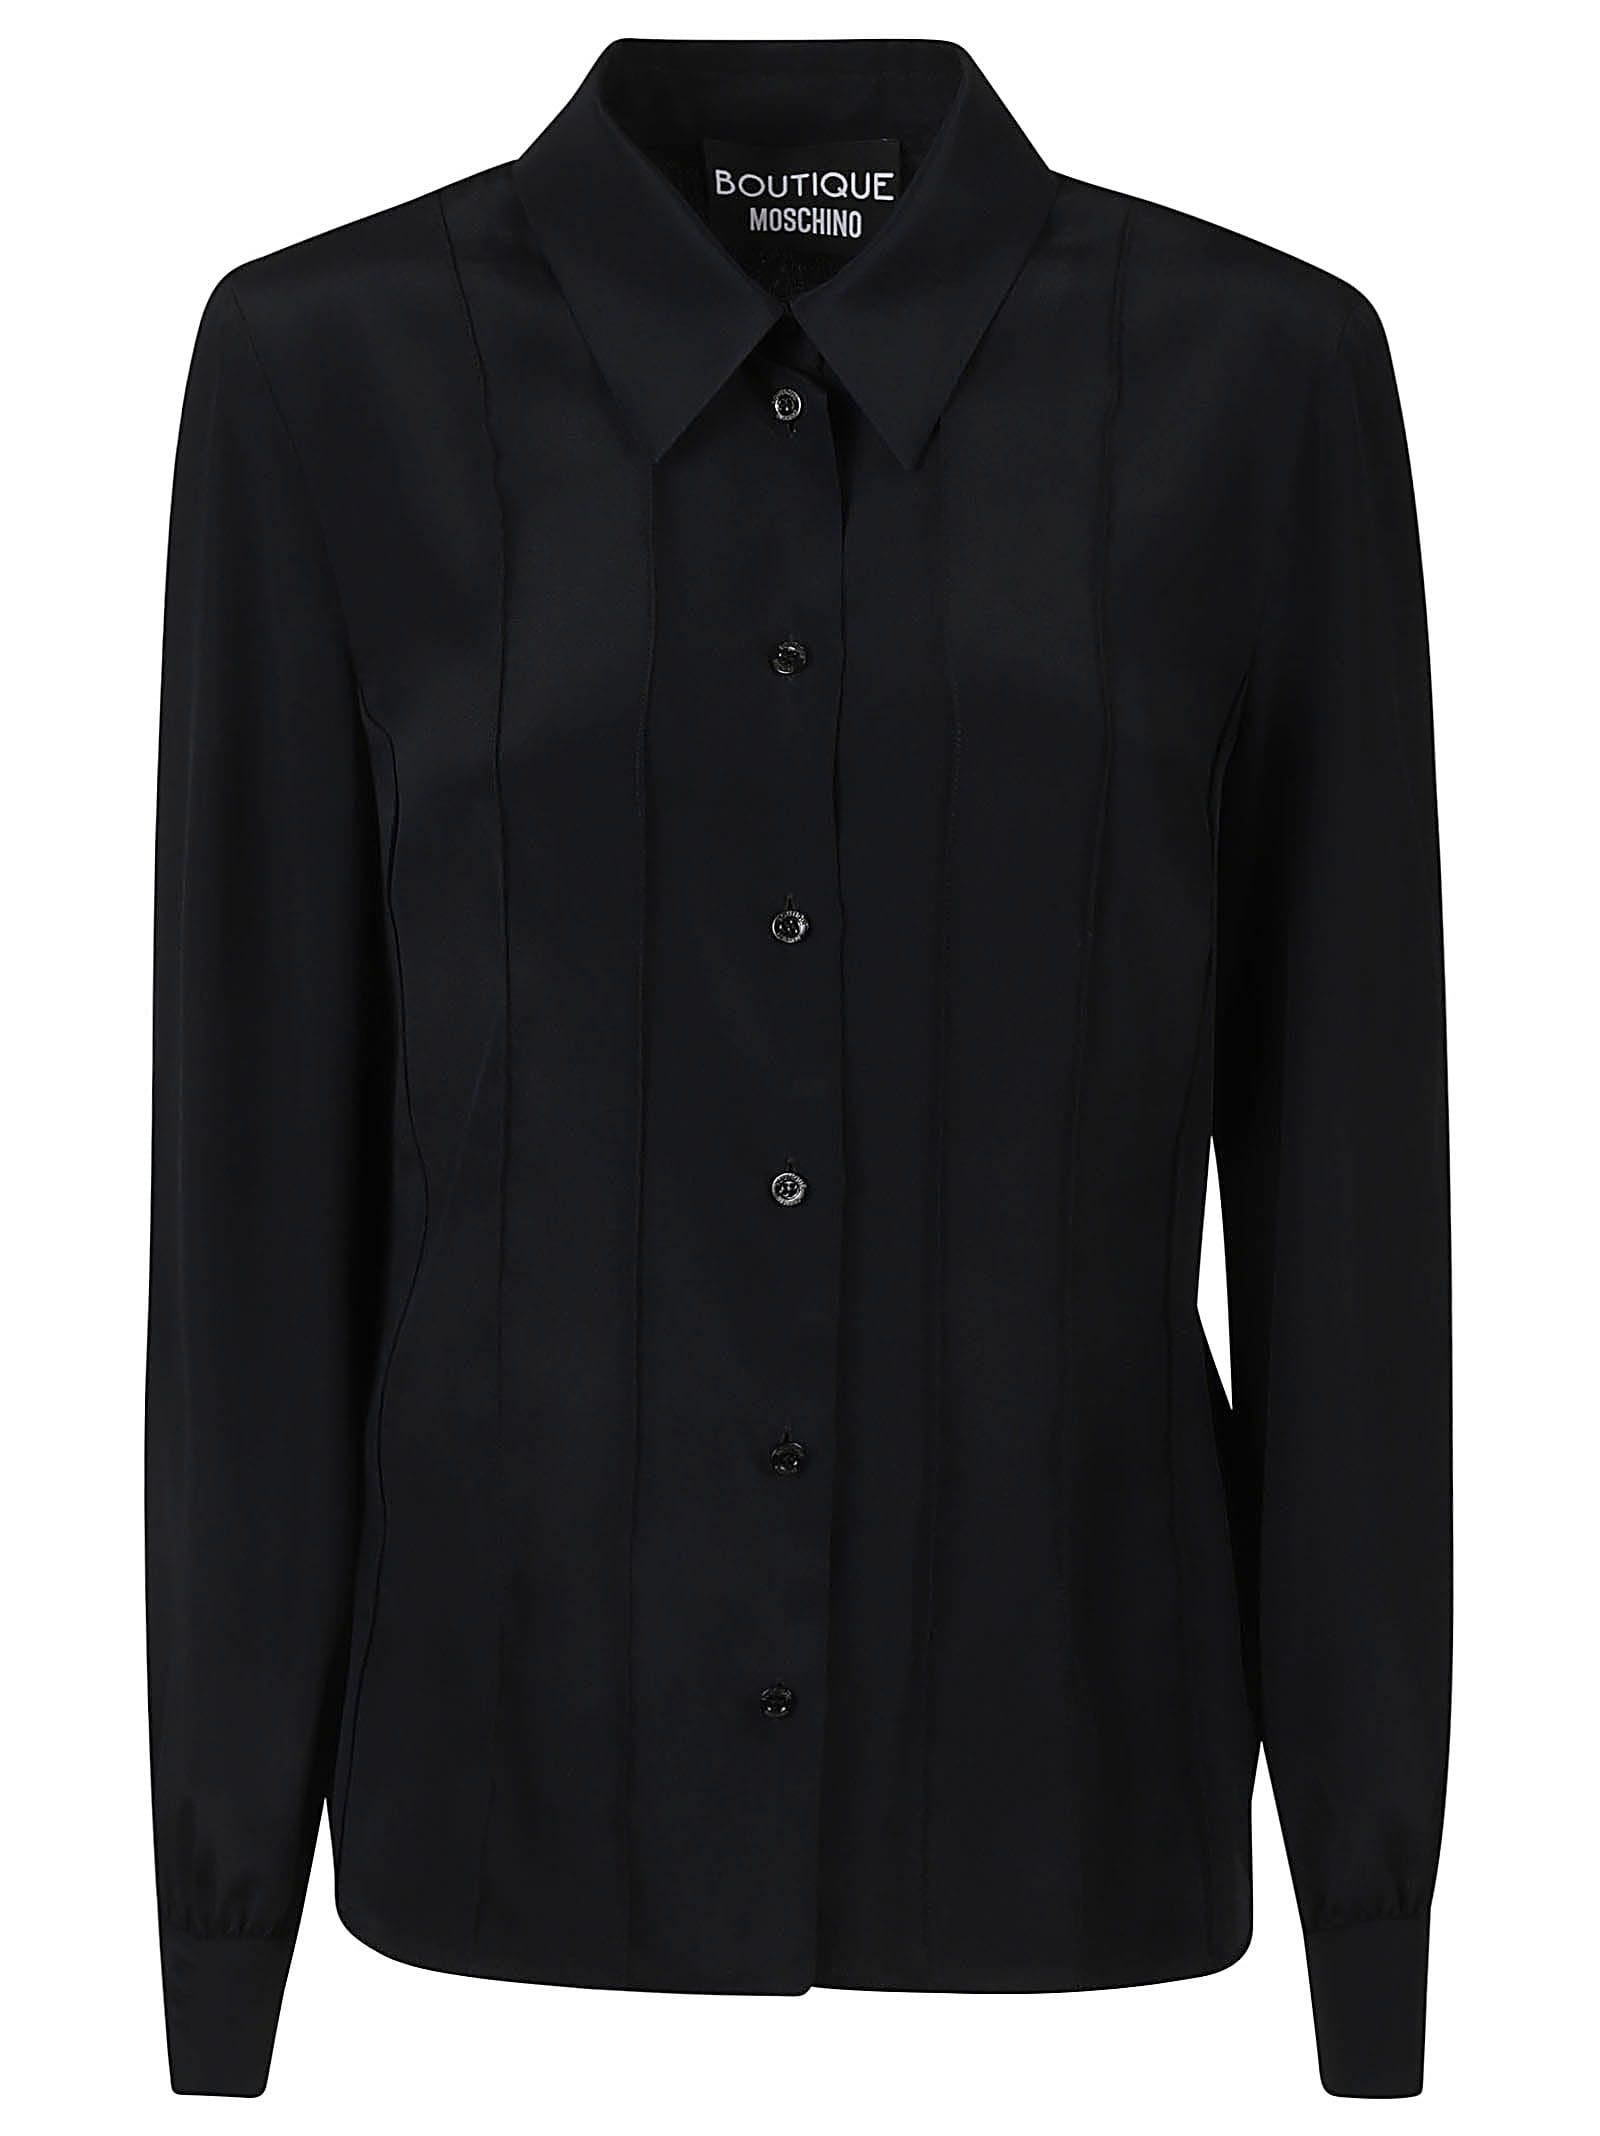 BOUTIQUE MOSCHINO PLEATED SHIRT